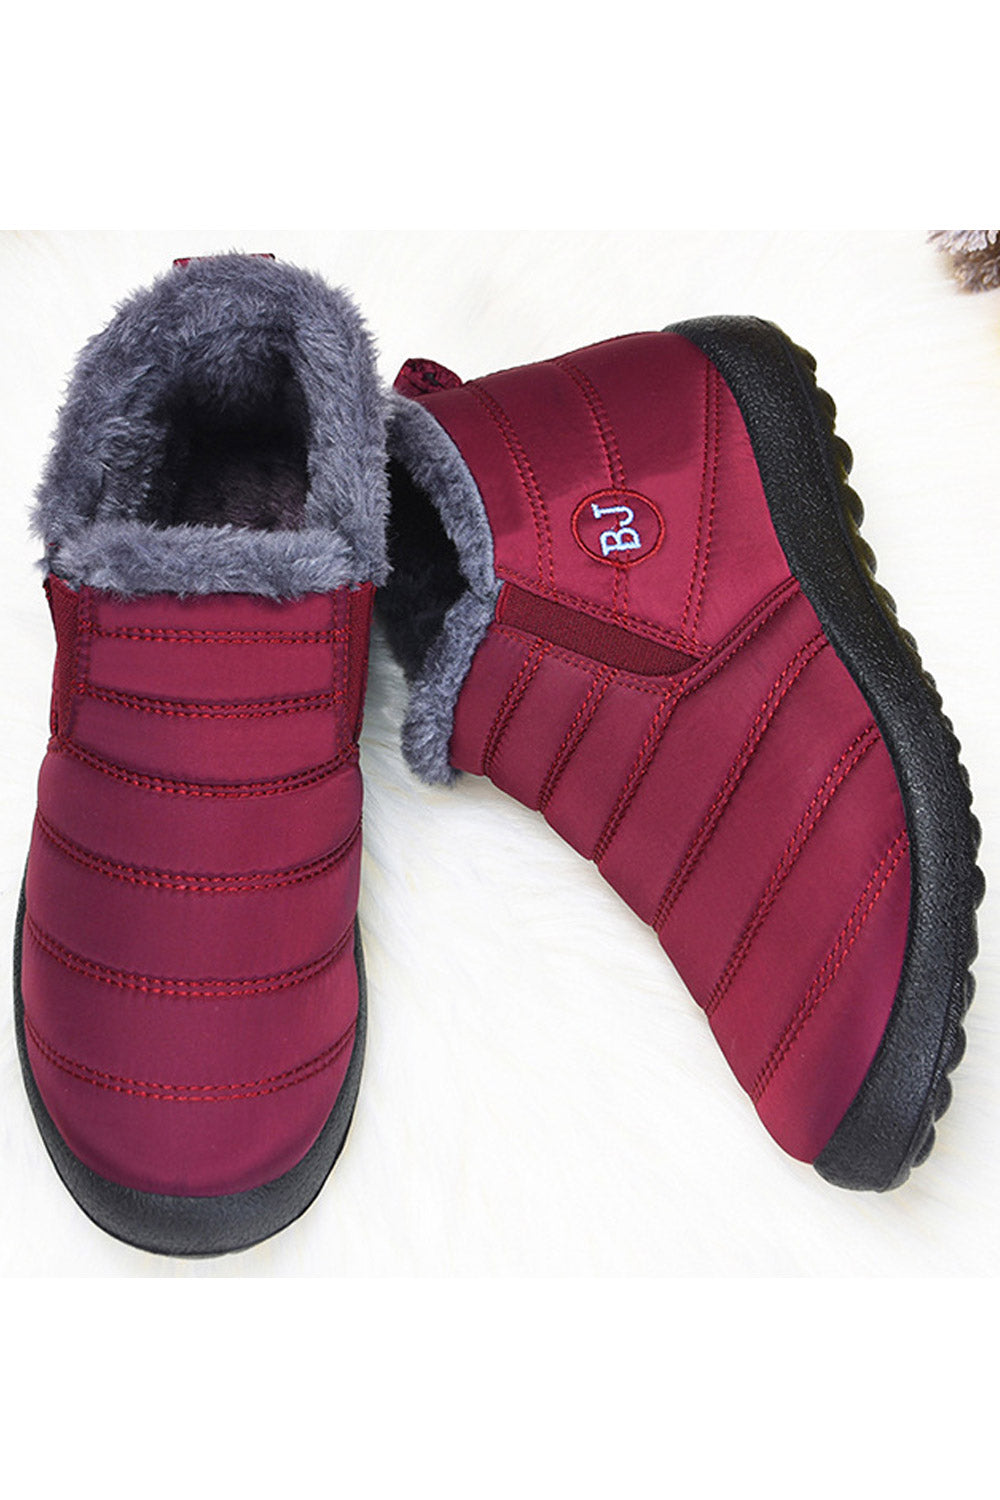 Women High Top Rubber Soled High Top Casual Cotton Warm Solid Pattern Amazing Boots - WSC50710